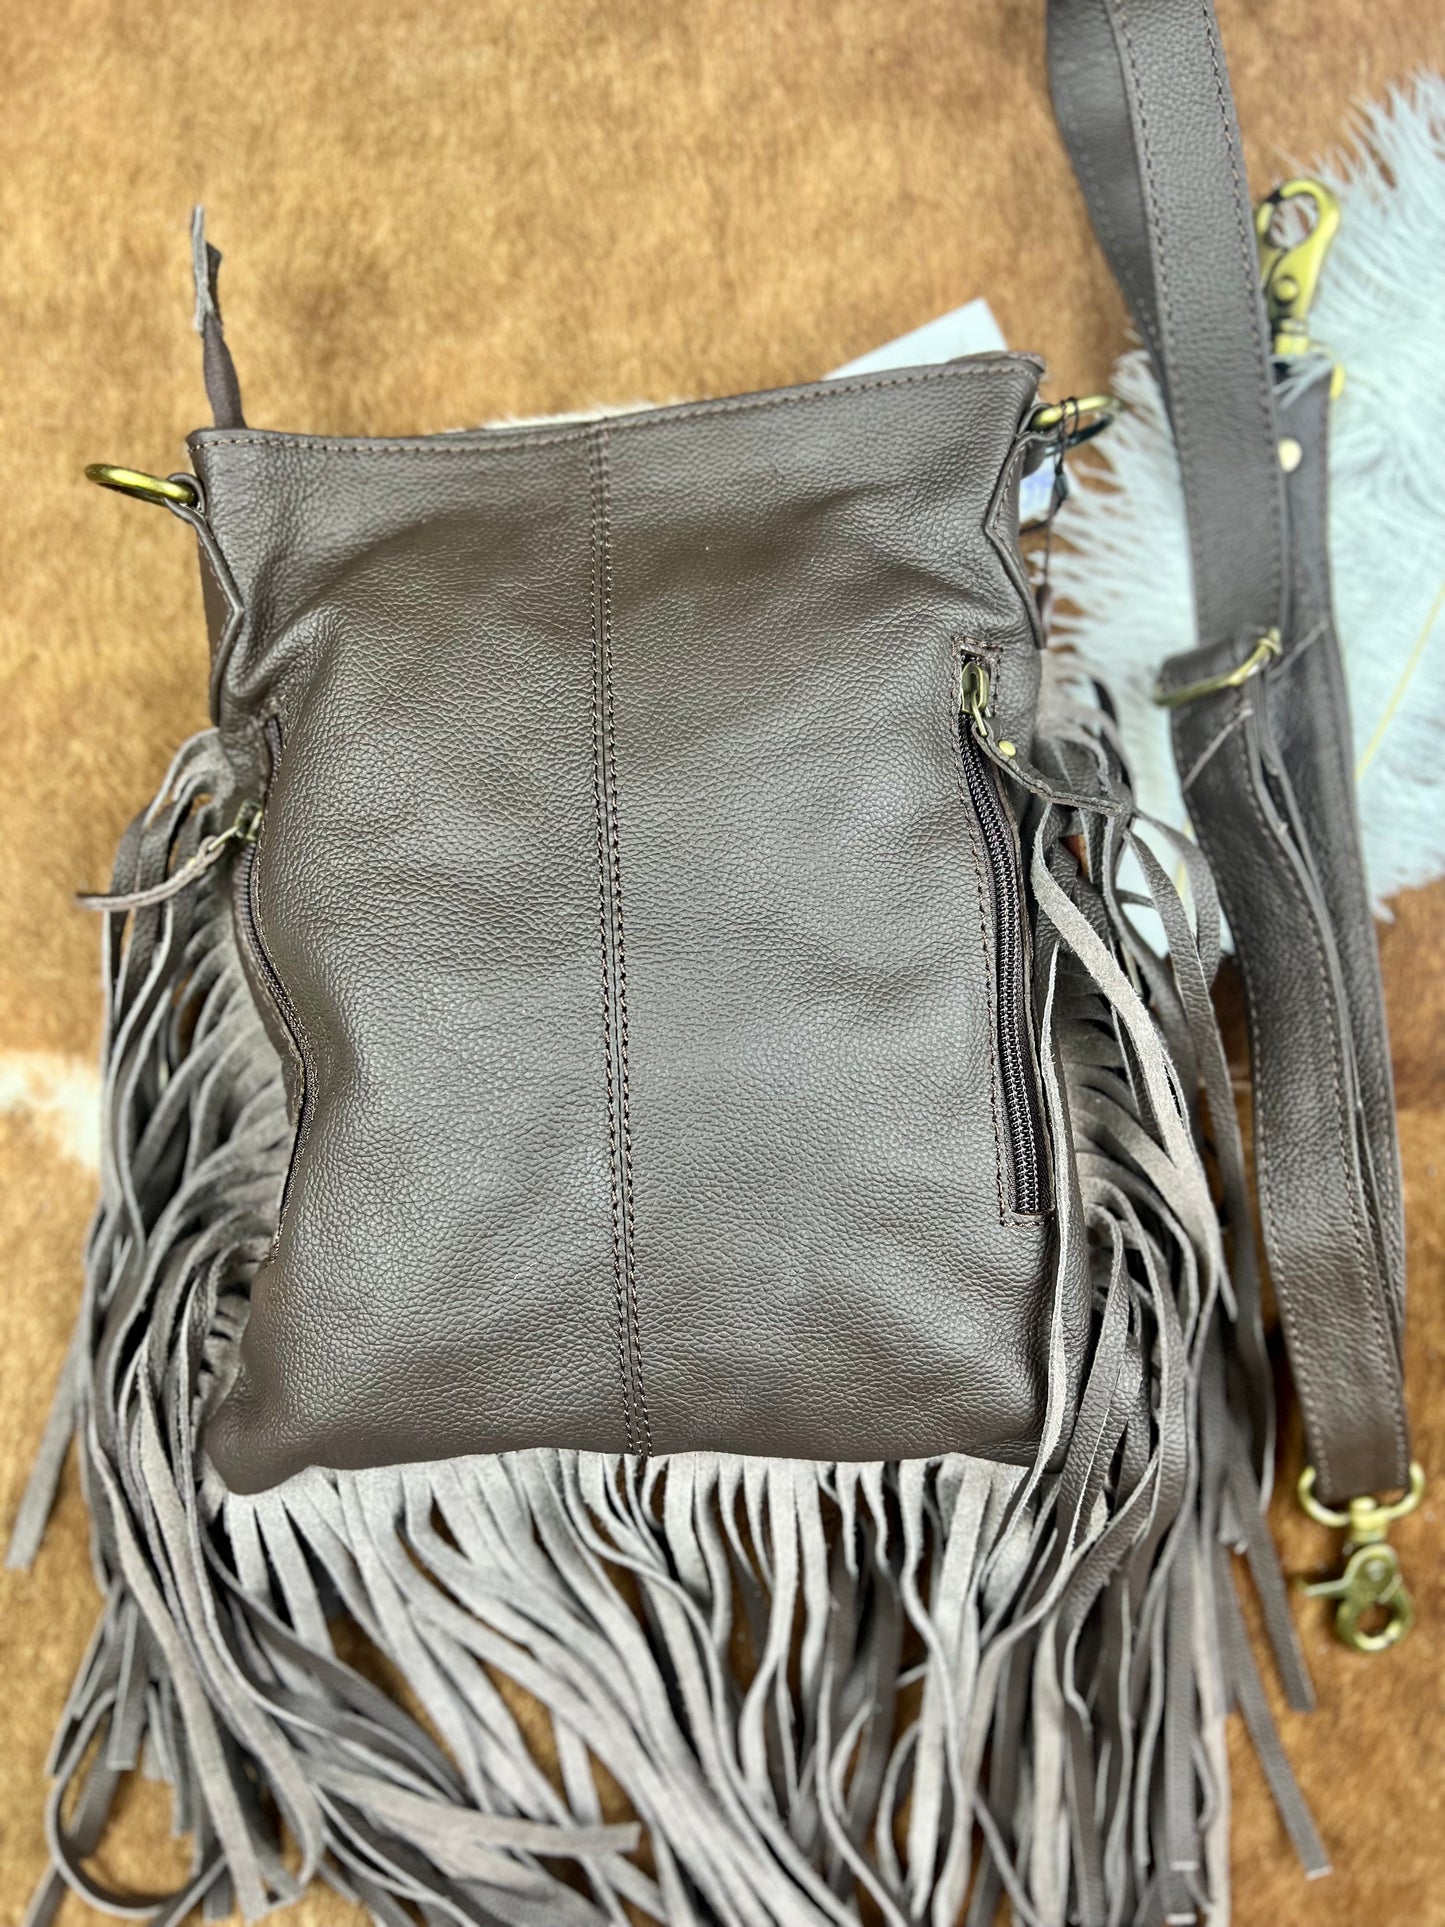 Fringe-Adorned Cowhide Bag with Crossbody Strap and Tote Handle